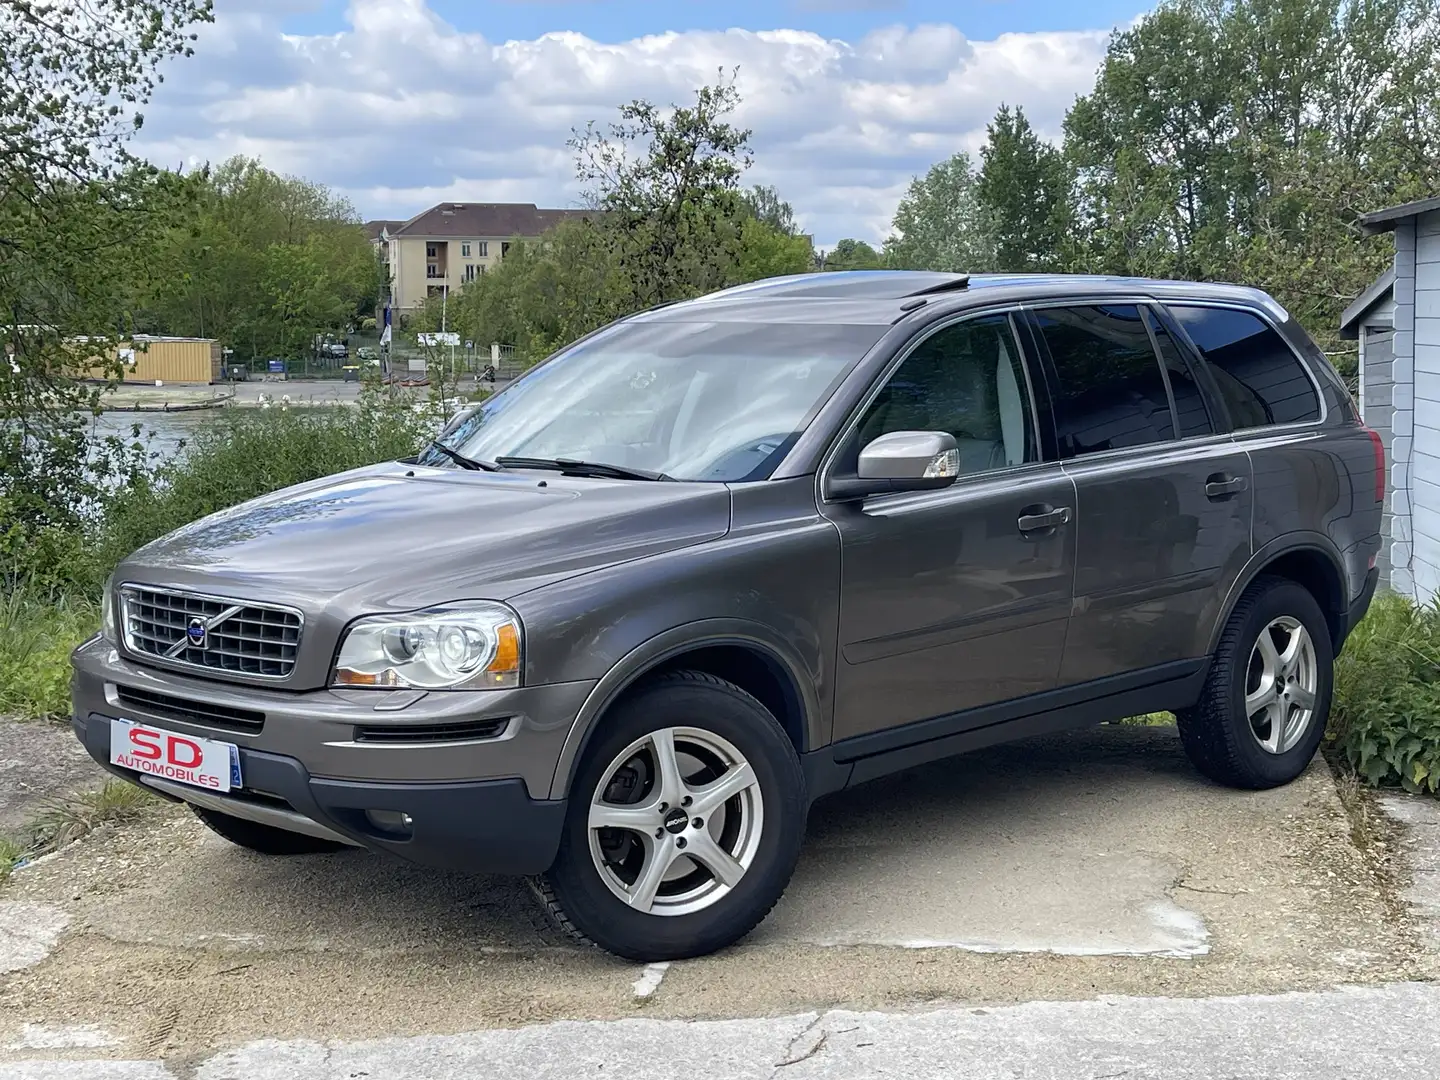 Volvo XC90 D5 185ch FAP Xenium Geartronic 7 places Braun - 1